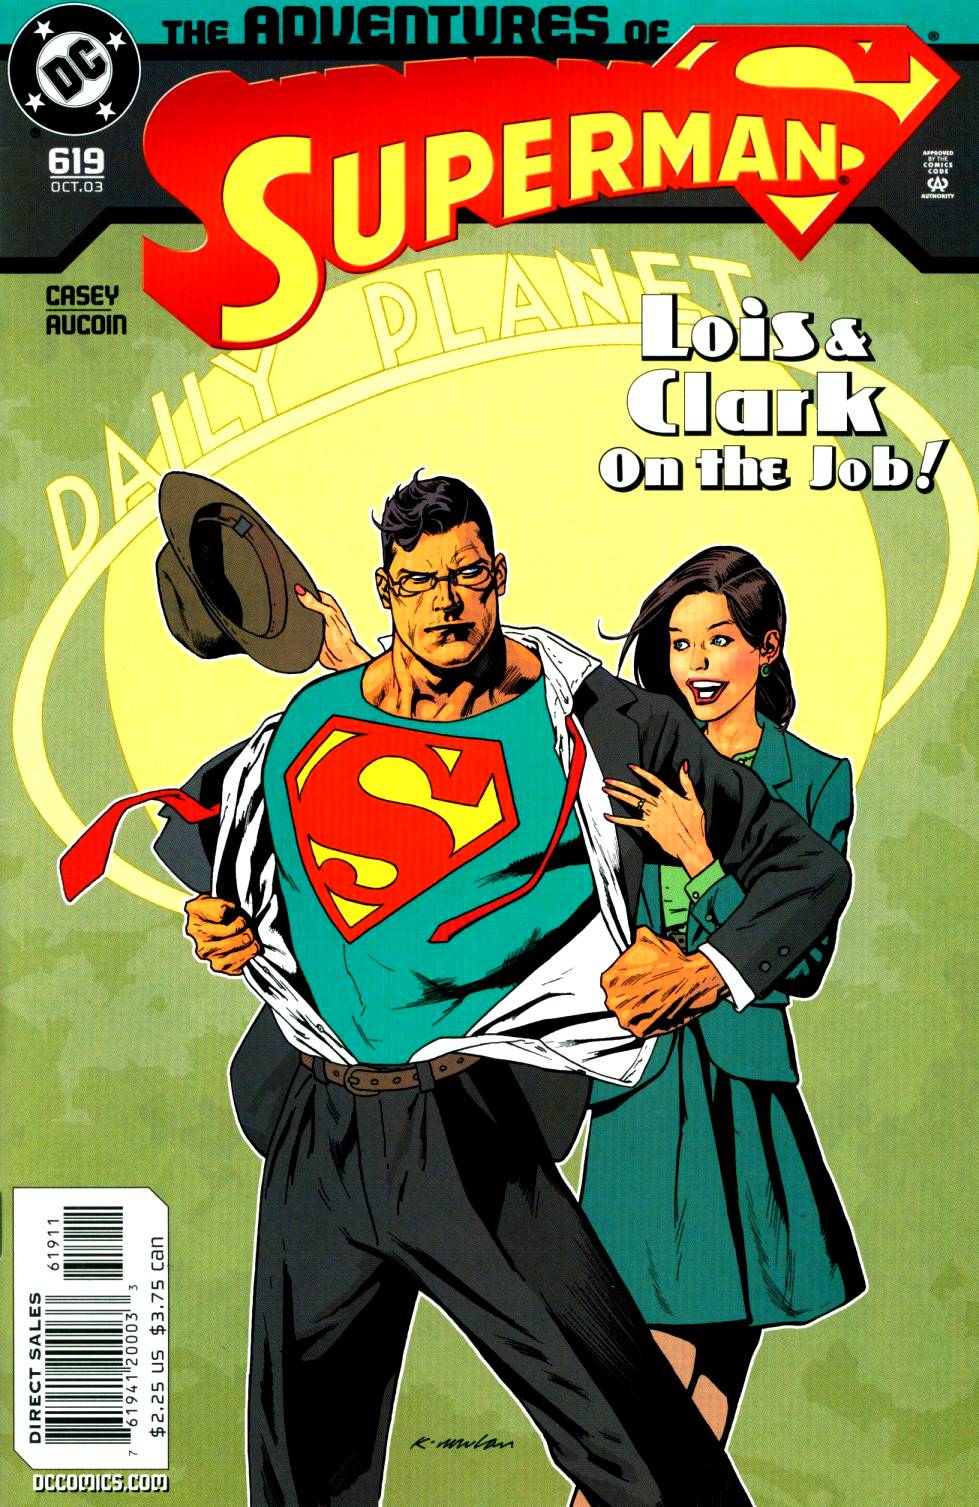 Read online Adventures of Superman (1987) comic -  Issue #619 - 1